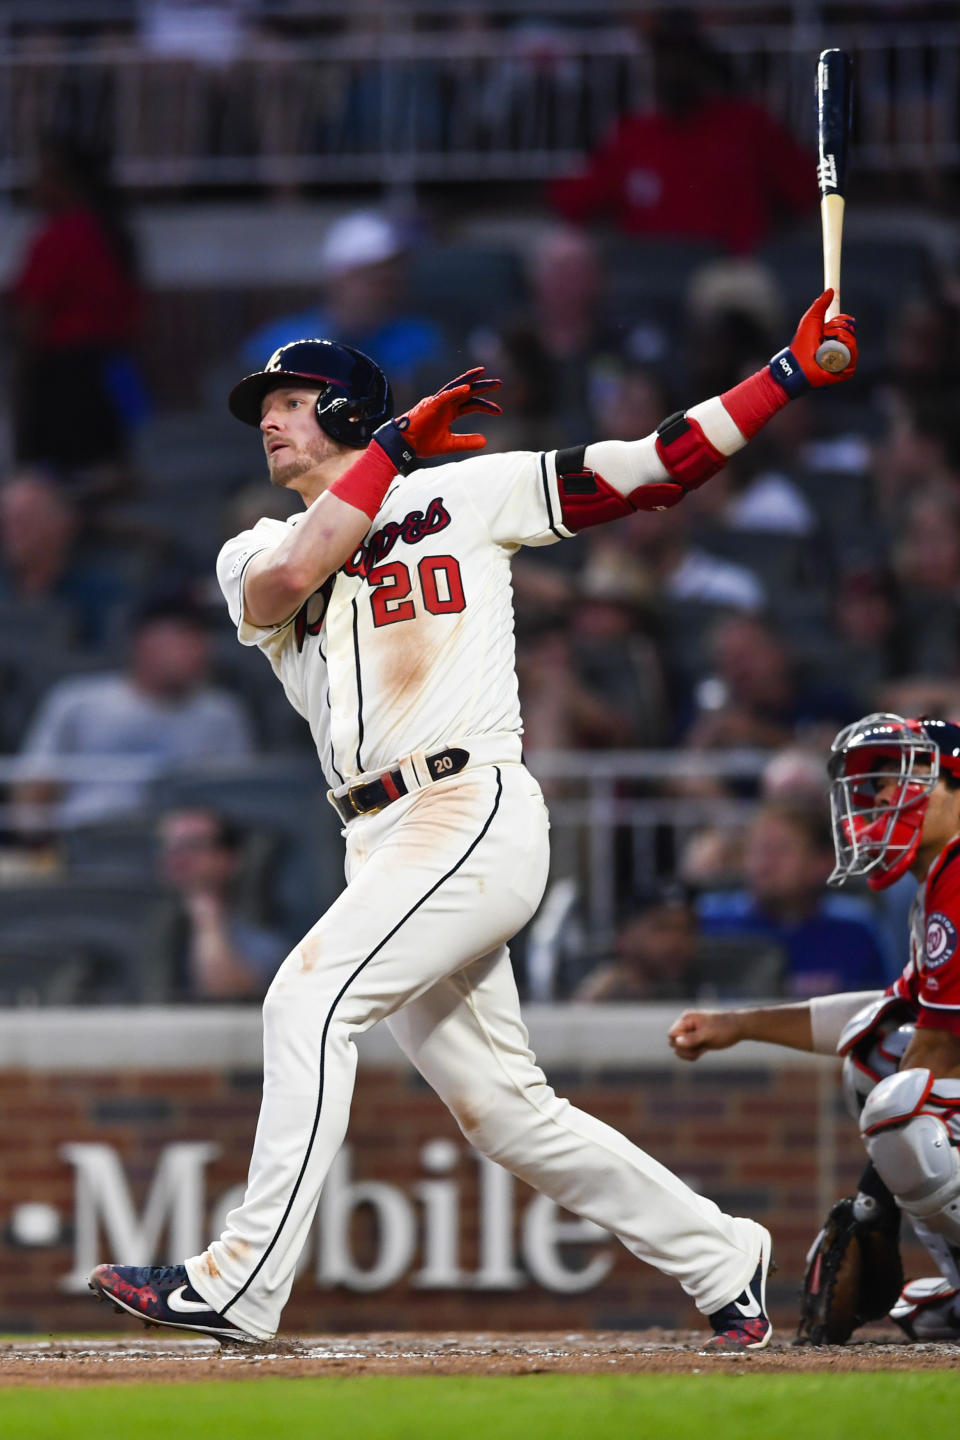 Atlanta Braves' Josh Donaldson watches his home run sail over left center field during the sixth inning of a baseball game against the Washington Nationals, Sunday, July 21, 2019, in Atlanta. (AP Photo/John Amis)